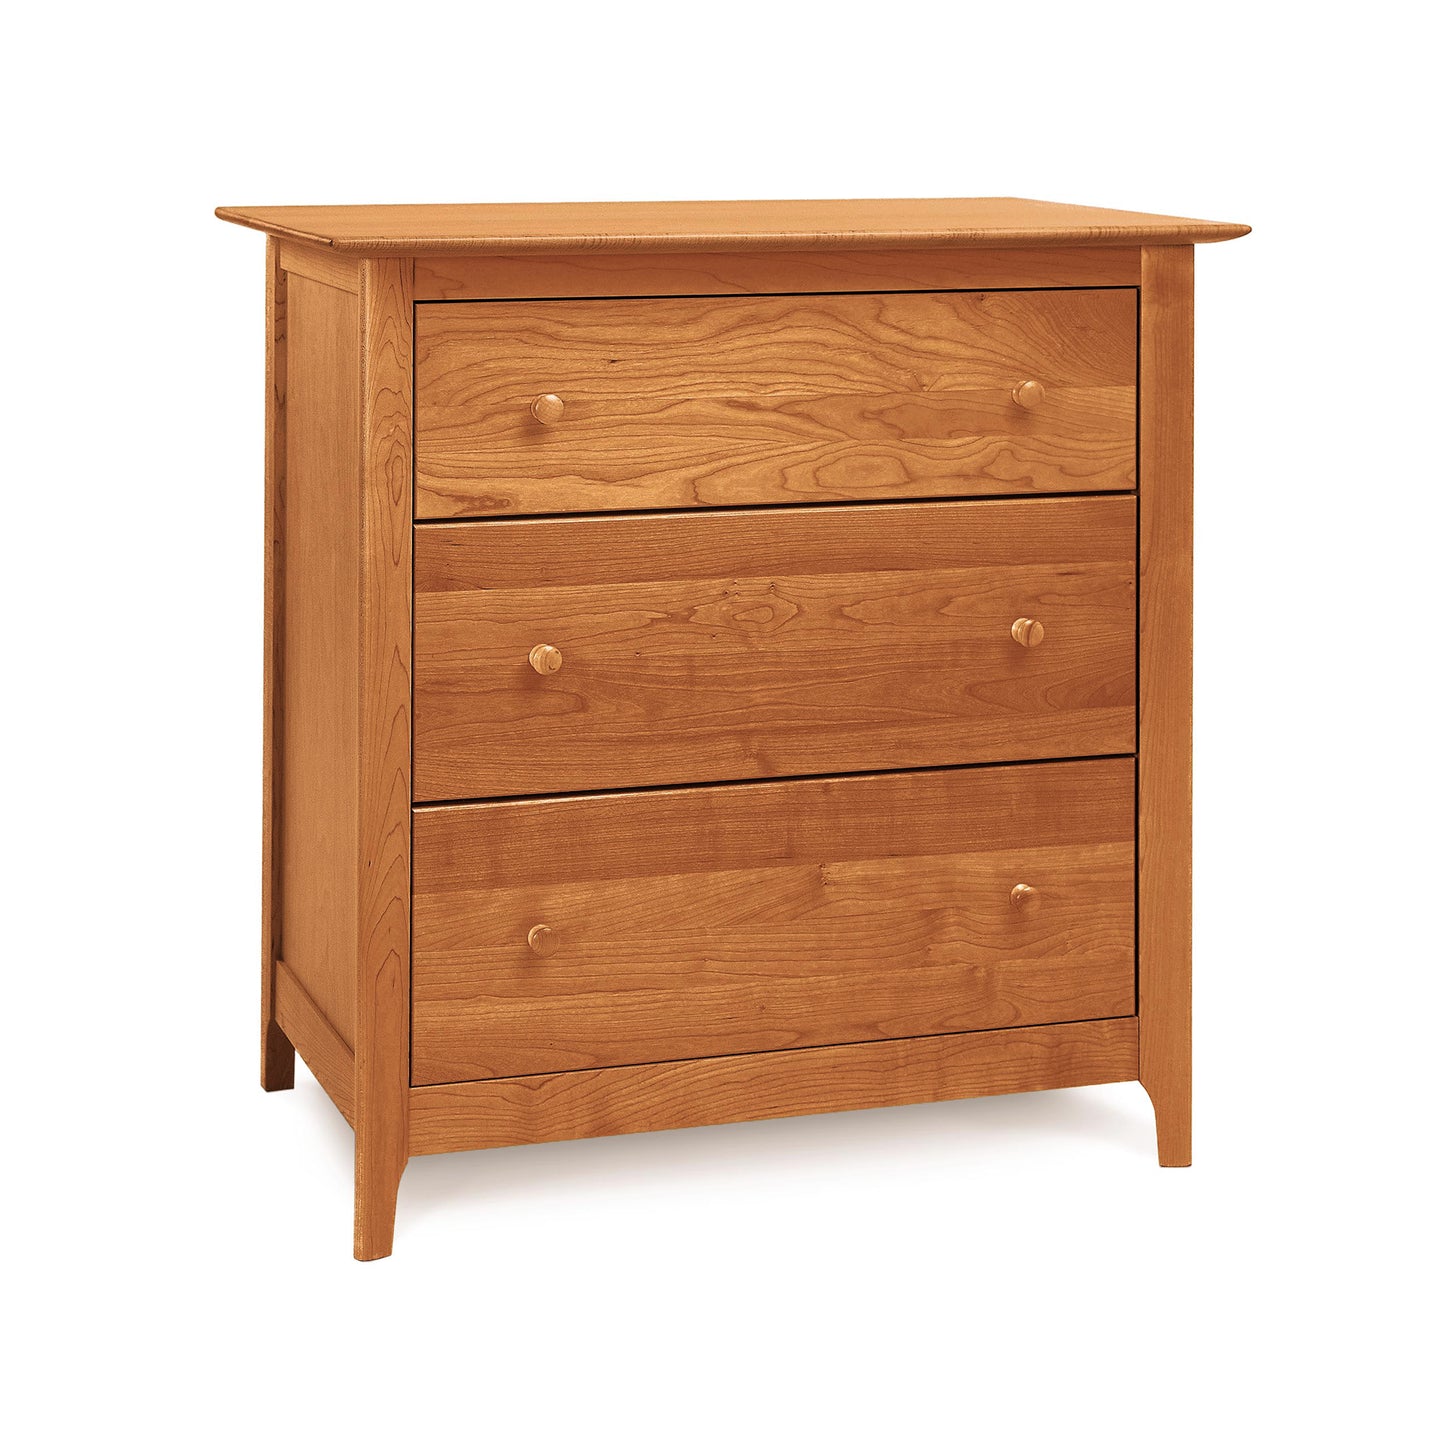 A handmade Sarah 3-Drawer Chest made of natural cherry wood with round knobs against a white background by Copeland Furniture.